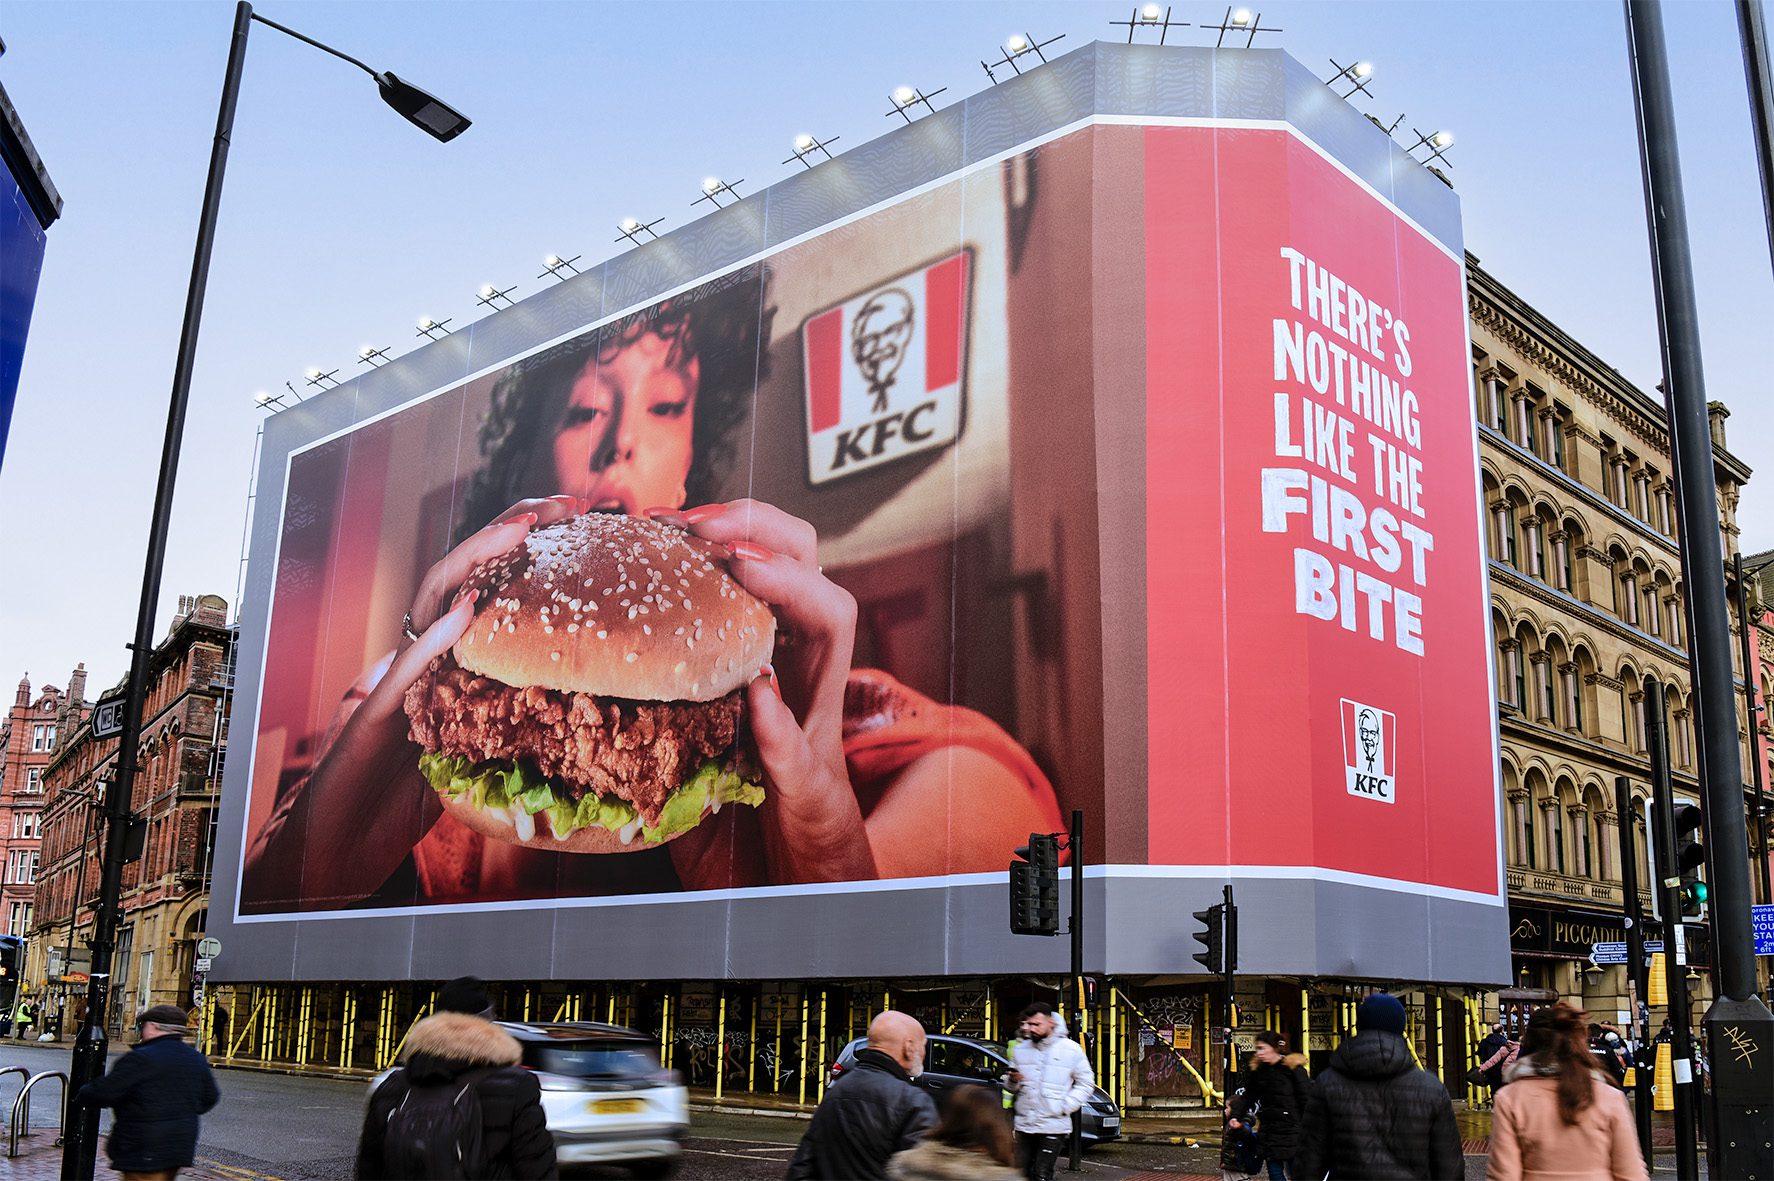 kfc_the_piccadilly0012